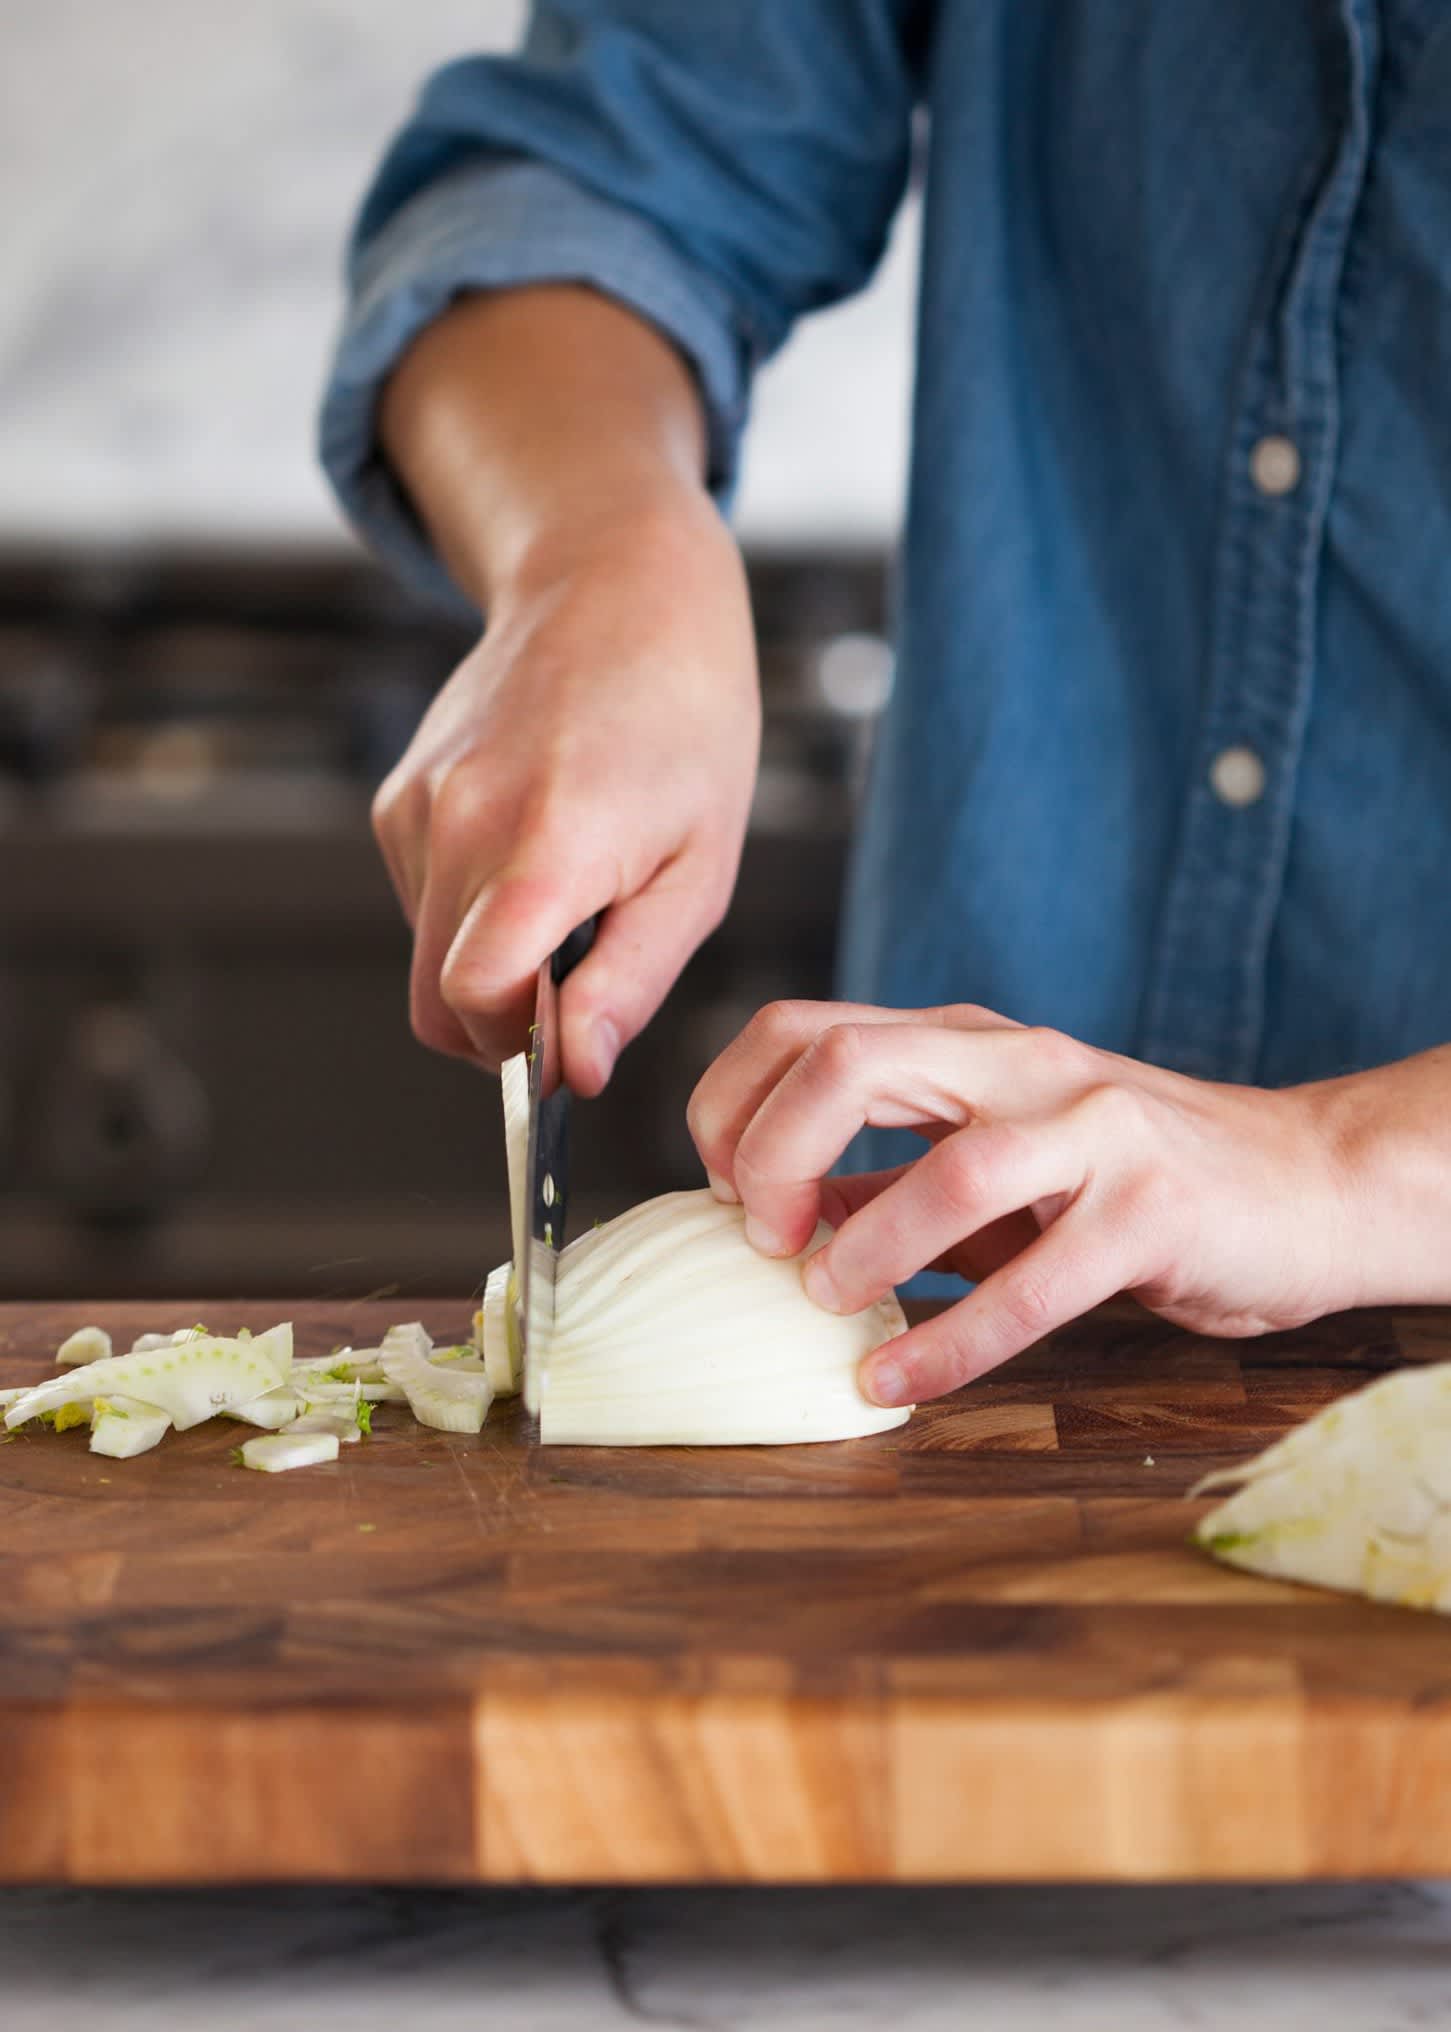 Become a Better Cook Today: 20 Ways to Improve Your Cooking Skills